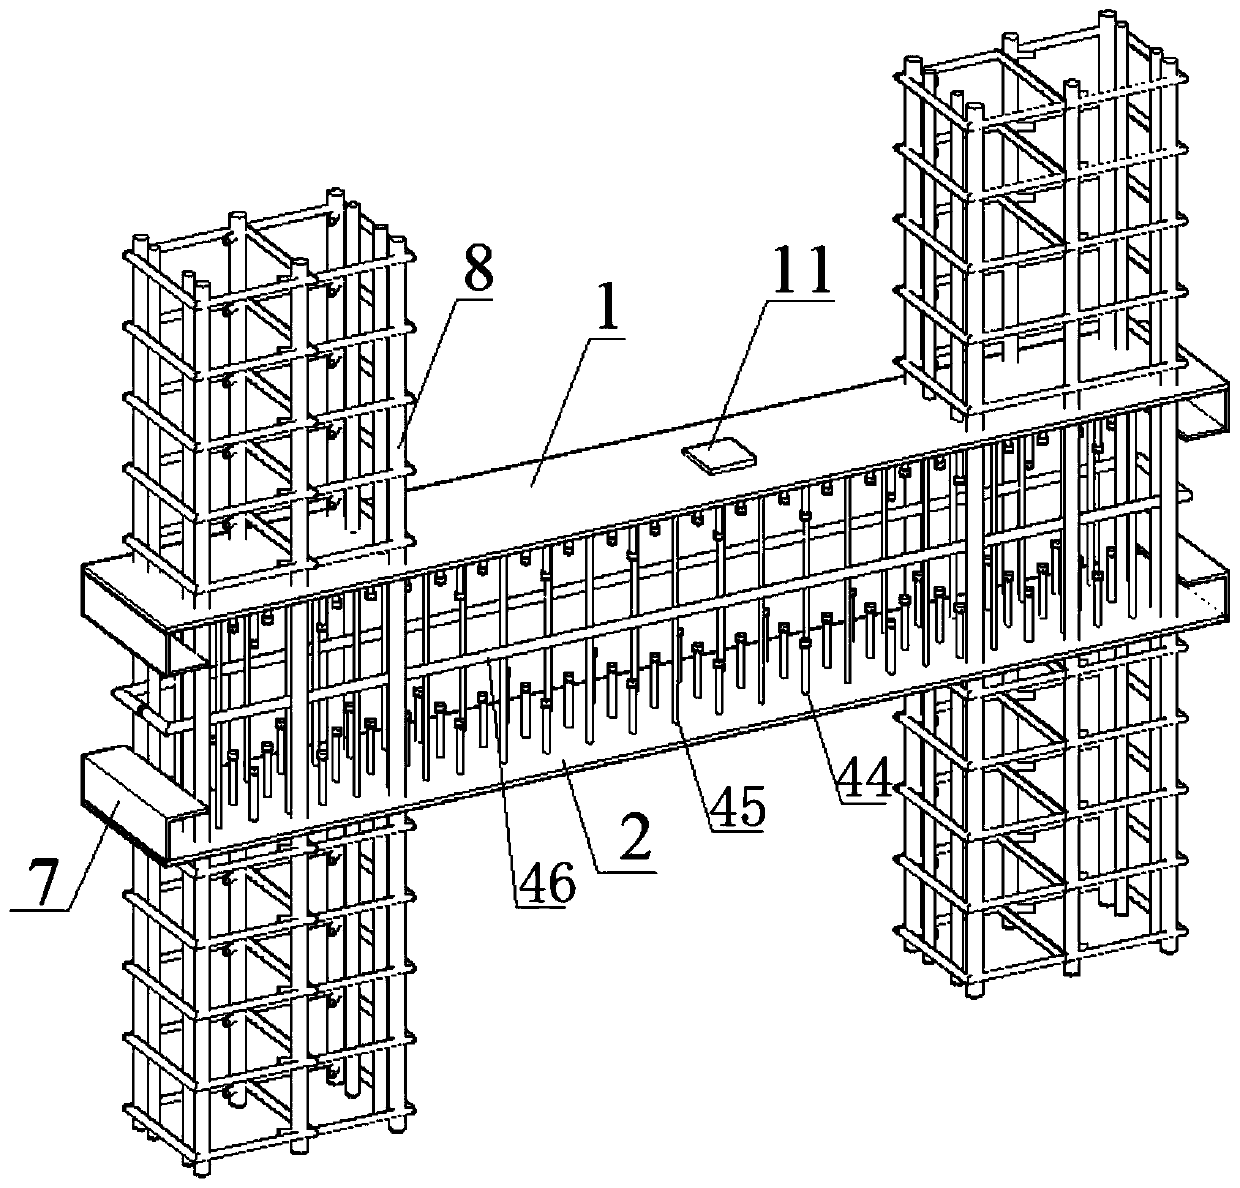 Double steel plate concrete composite energy dissipation coupling beam, and construction method